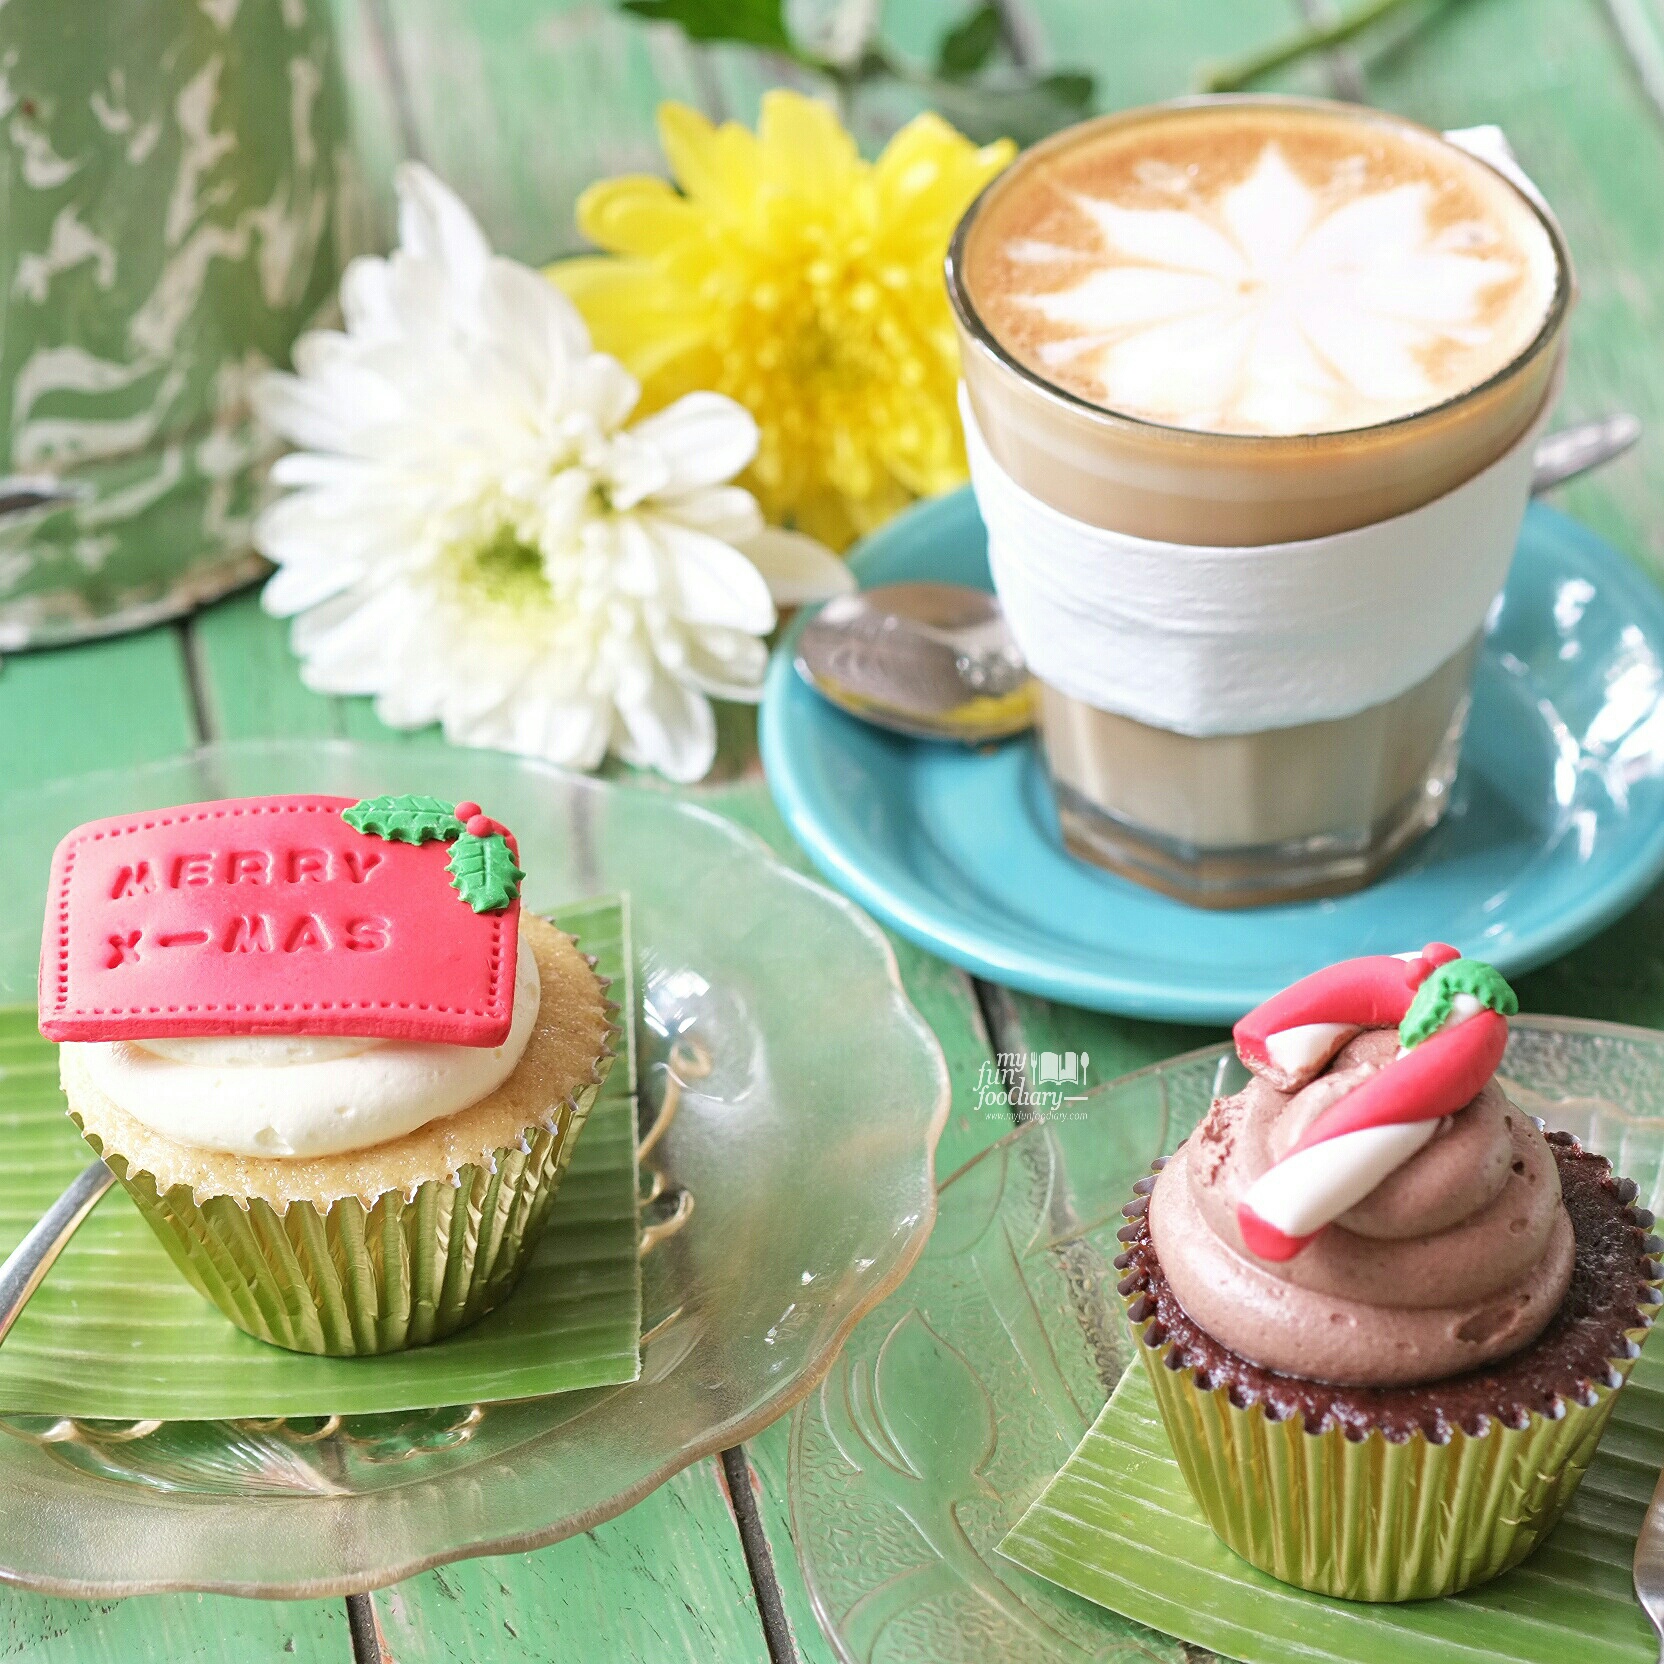 Christmas Cupcakes and Coffee at Bungalow Living Cafe Bali by Myfunfoodiary